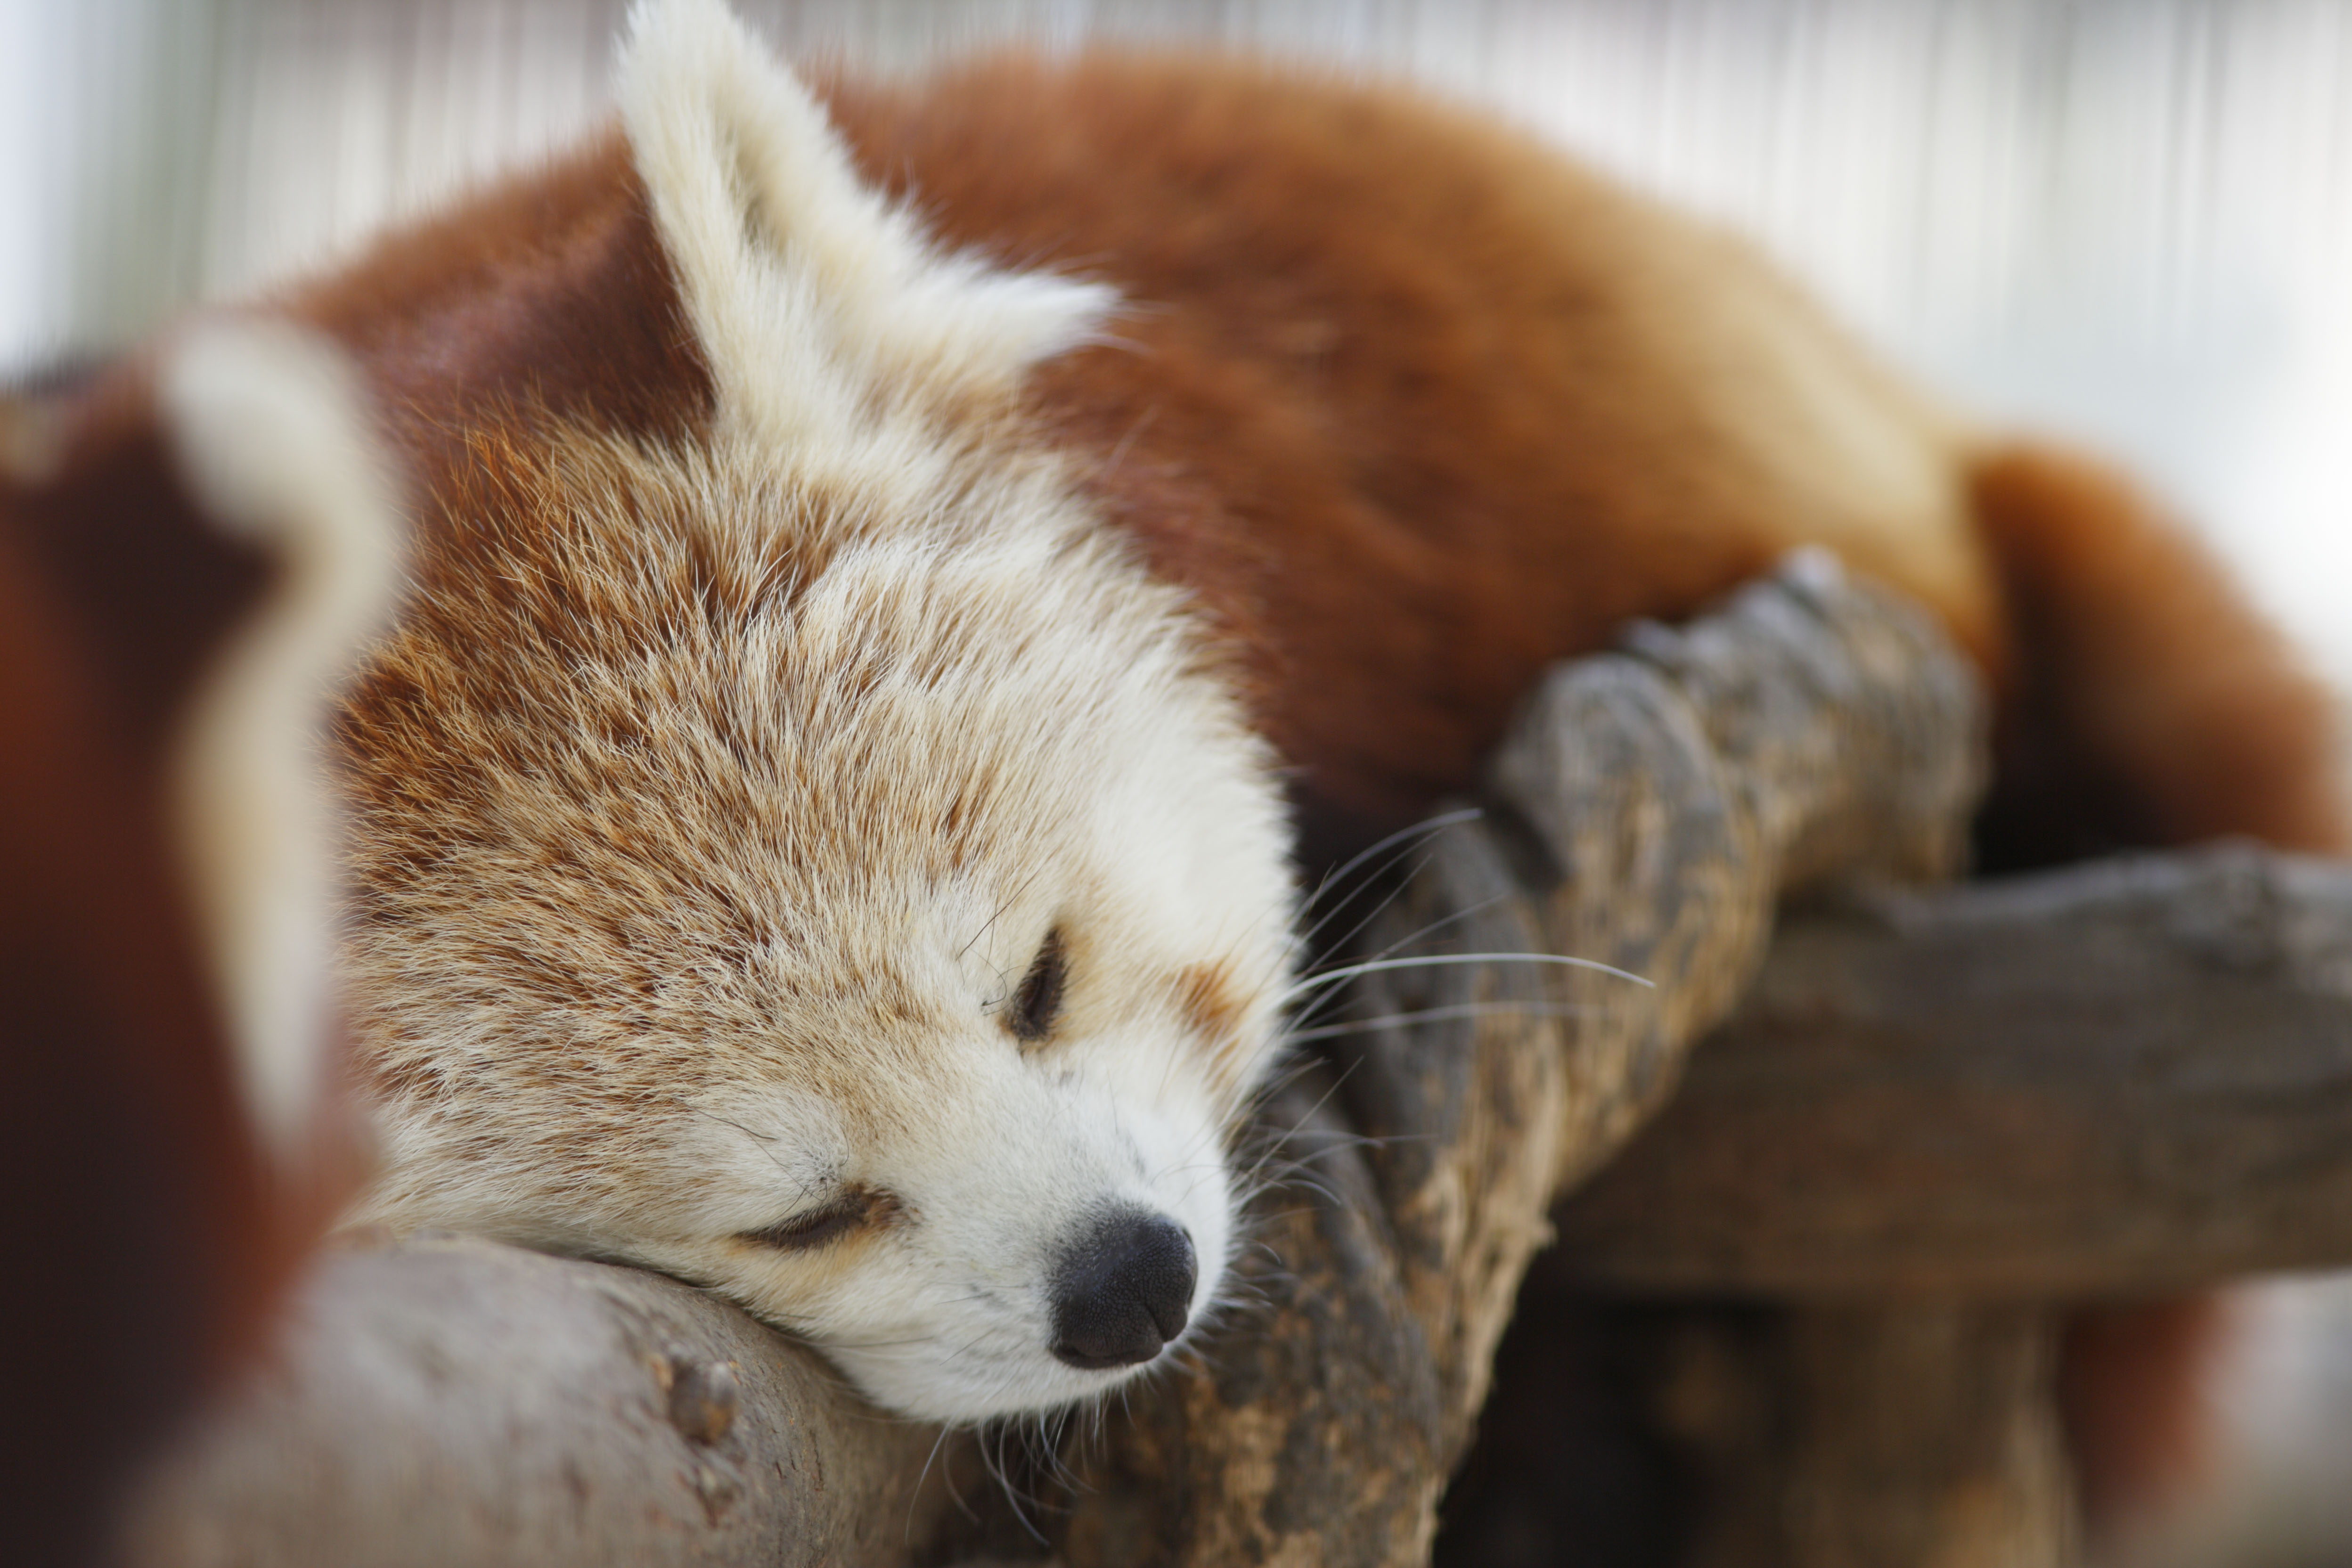 photo,material,free,landscape,picture,stock photo,Creative Commons,The afternoon of the nap, panda, , red panda, nap